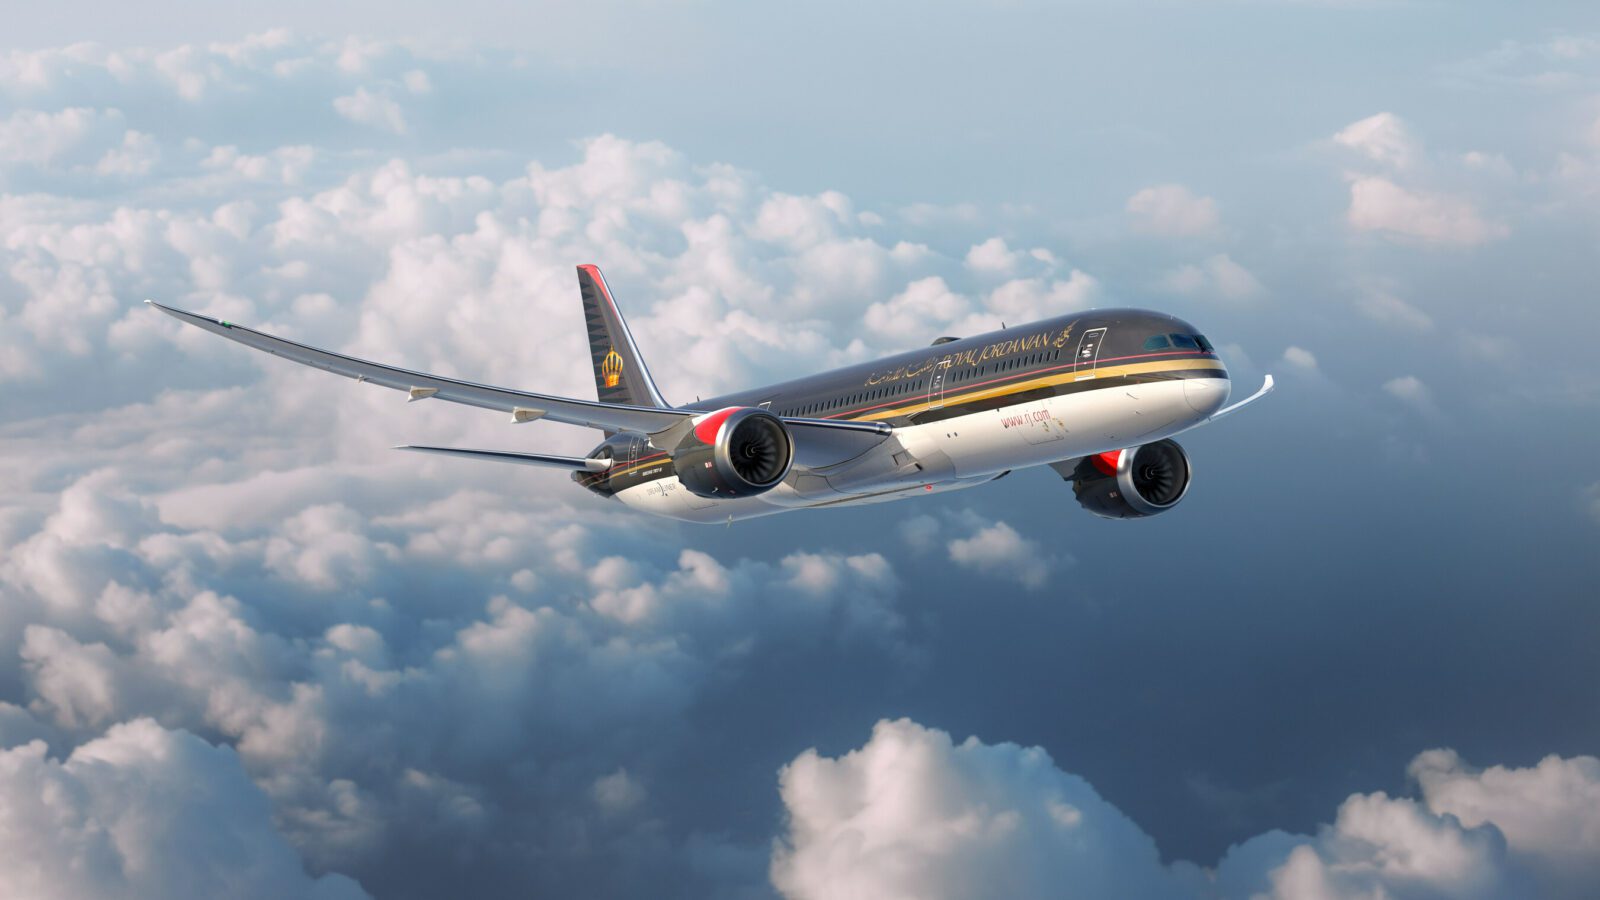 "Our decision to add the 787-9 Dreamliners to our fleet is a testament to our dedication to providing an unparalleled travel experience," said Samer Majali, vice chairman and CEO of Royal Jordanian. "This move aligns seamlessly with our broader strategy of fleet modernization, emphasizing fuel efficiency, sustainability and passenger comfort. As we embark on this journey, we are confident that the Dreamliner's cutting-edge technology will play a pivotal role in elevating our operational capabilities." Building on Royal Jordanian's fleet of seven 787-8 airplanes, the addition of another member of the Dreamliner family will enable the airline to fly more passengers and cargo farther. The 787-9 can fly 296 passengers 14,010 km (7,565 nautical miles), building on routes first opened by the 787-8. "Royal Jordanian, having been the first in the Middle East to order the 787 over 16 years ago, continues to lead in adopting advancements in aviation," said Majali. "The airline's current fleet of seven 787-8 Dreamliners has proven successful in connecting Amman to major global destinations. The additional order underscores Royal Jordanian's forward-looking approach and commitment to meeting the growing demand for long-haul travel." "This order for additional 787s is a testament to Royal Jordanian's longstanding commitment to the market-leading capabilities of the Dreamliner," said Stan Deal, president and CEO of Boeing Commercial Airplanes. "We are confident Royal Jordanian will profitably expand its network and operate a more sustainable fleet with these new fuel-efficient jets." Boeing Global Services will also provide modification services for Royal Jordanian's in-service 787s that will enhance in-flight connectivity for passengers and crew. As part of the agreement, Boeing will perform the engineering work, while supplying kits for the modifications. Since revenue service began in 2011, the 787 family has launched more than 380 new nonstop routes around the world. The 787 Dreamliner family reduces fuel use and emissions by 25% compared to the airplanes it replaces. Boeing's 2023 Commercial Market Outlook (CMO) cites a growing need for widebody airplanes in the Middle East as passenger demand in the region continues to grow between major population centers. The CMO projects delivery of 3,025 new commercial airplanes in the region by 2042 ─ nearly half of which will be widebodies.